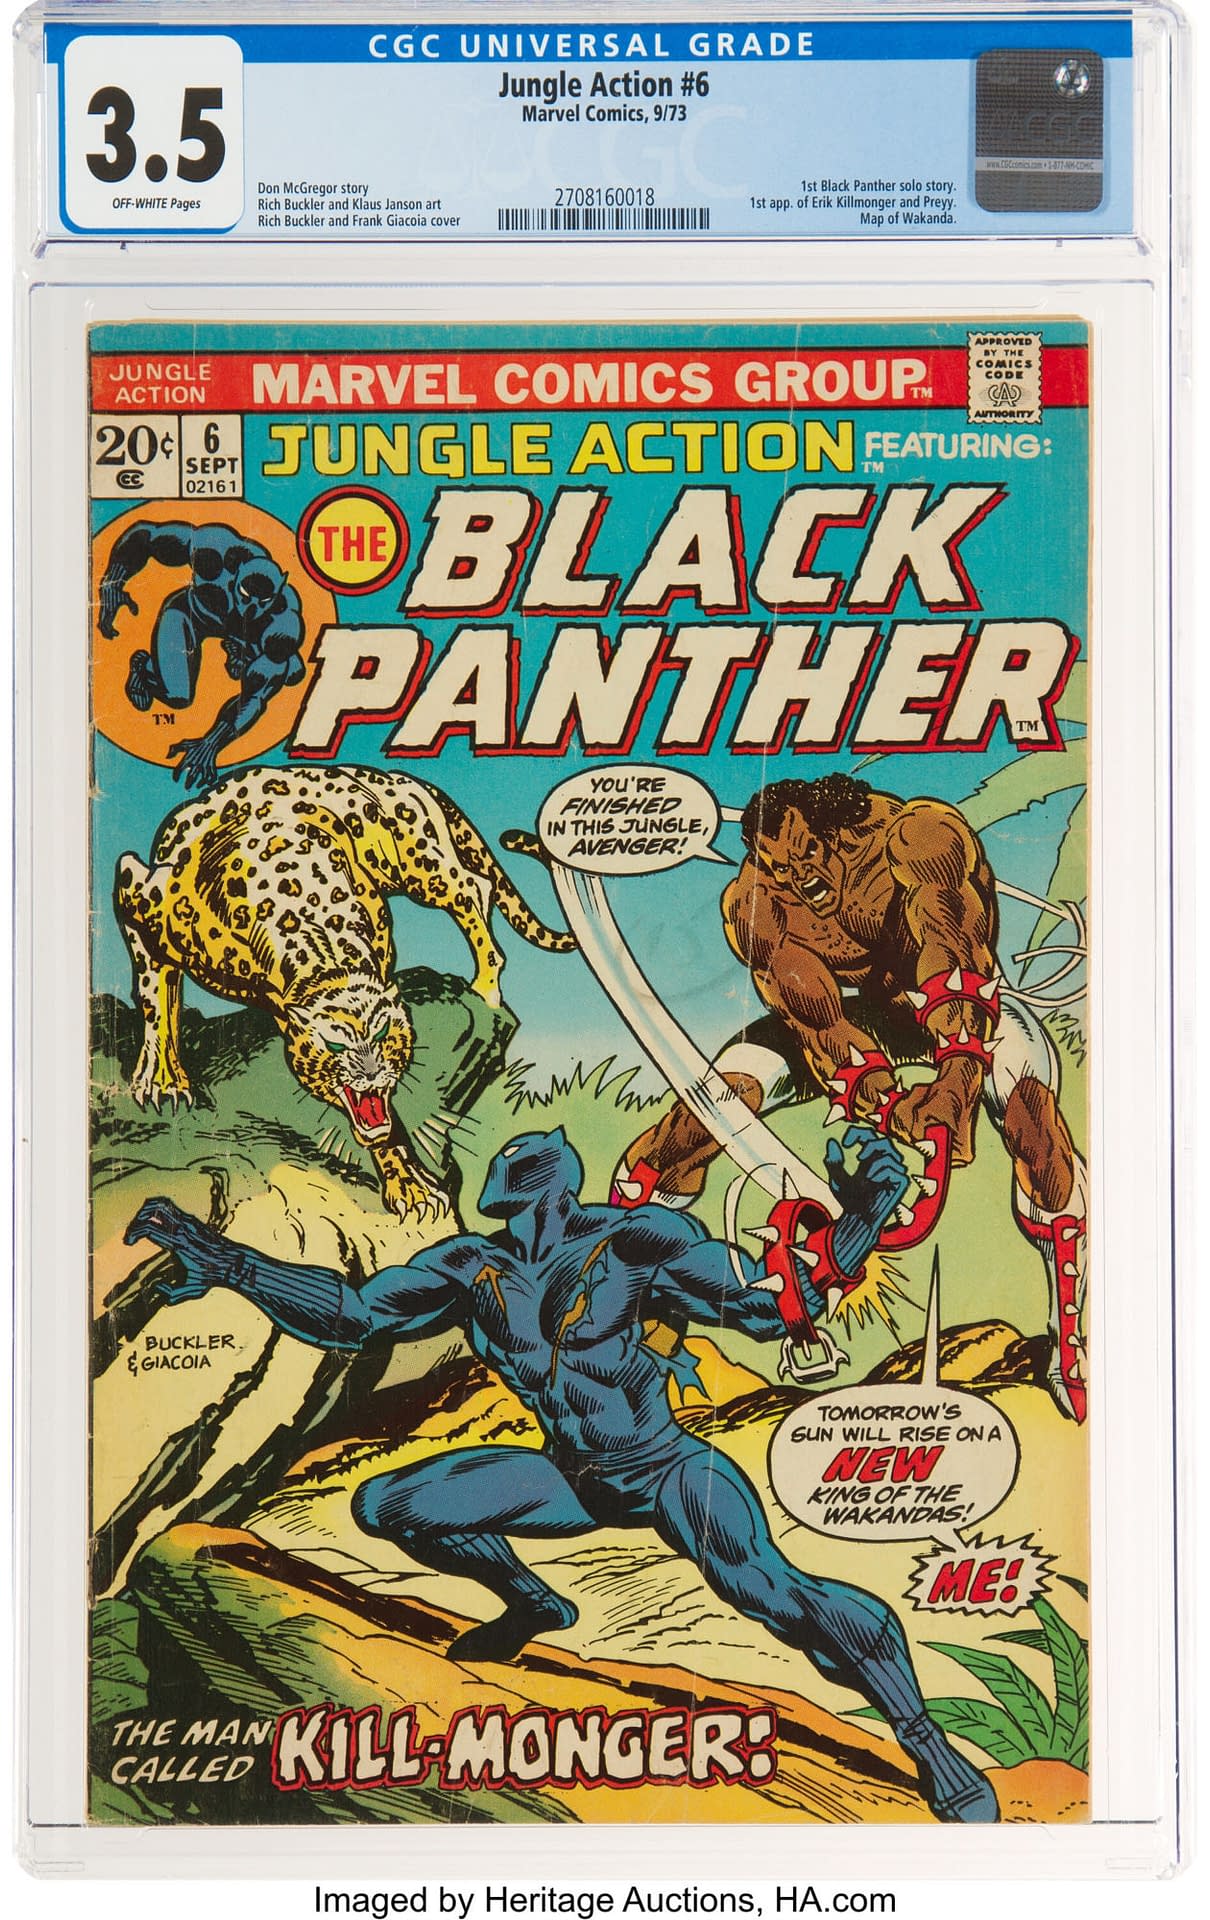 Black Panther: 6 Marvel Comics That Could Inspire the New Game